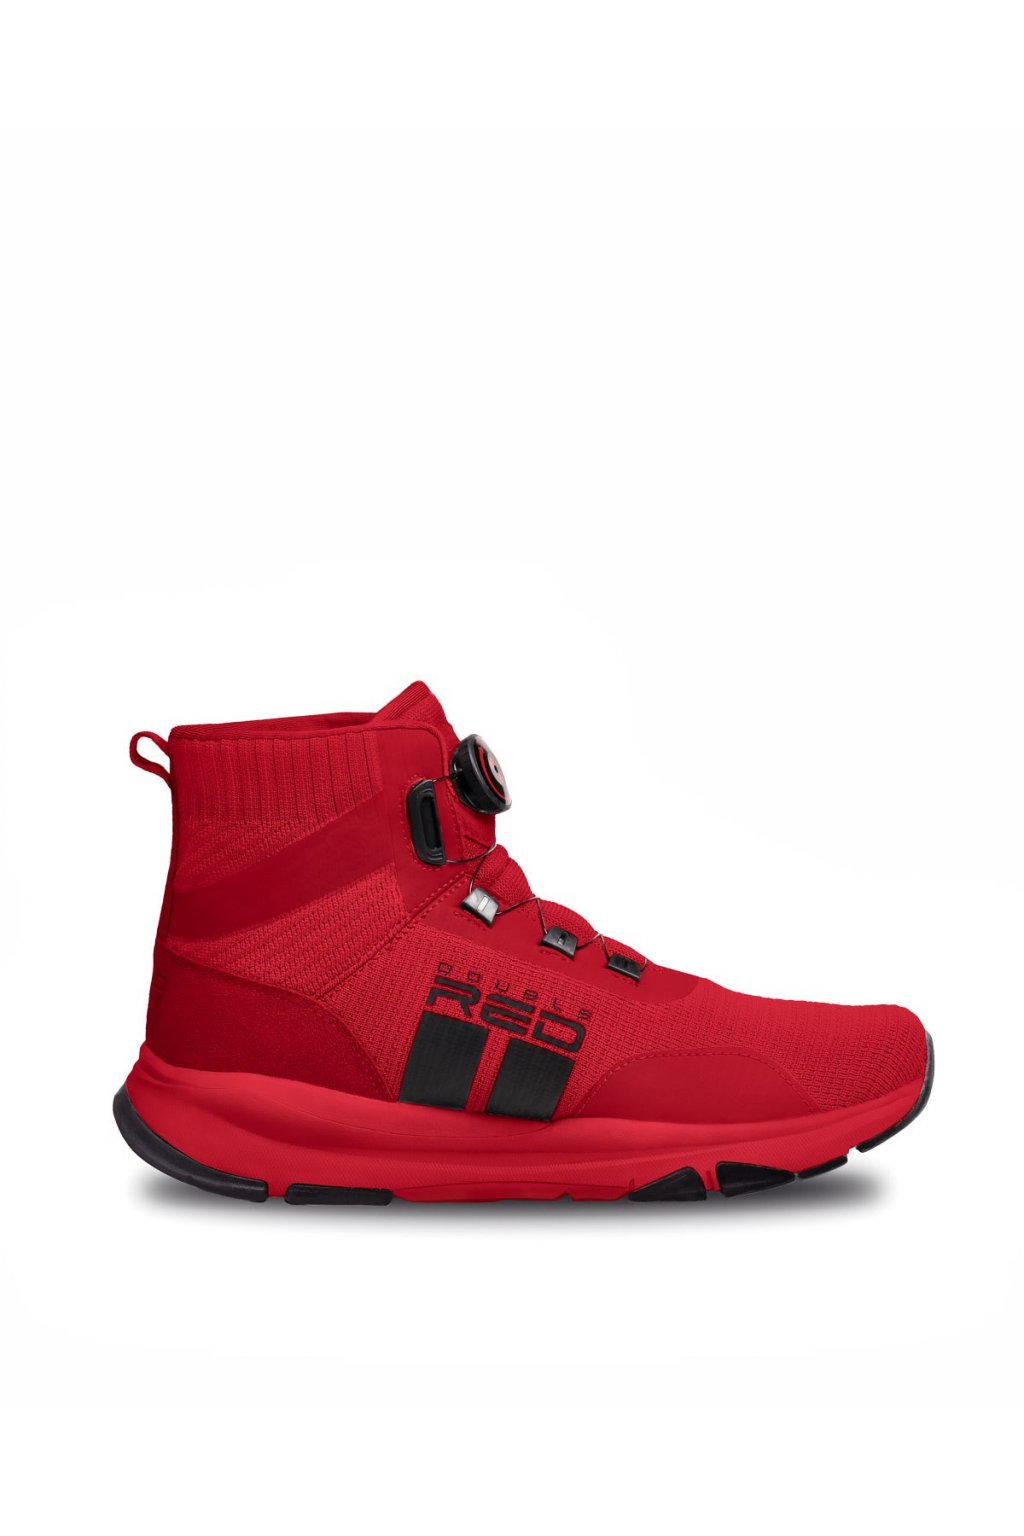 Boty Double Red WIRE™ Ninja Red Boots